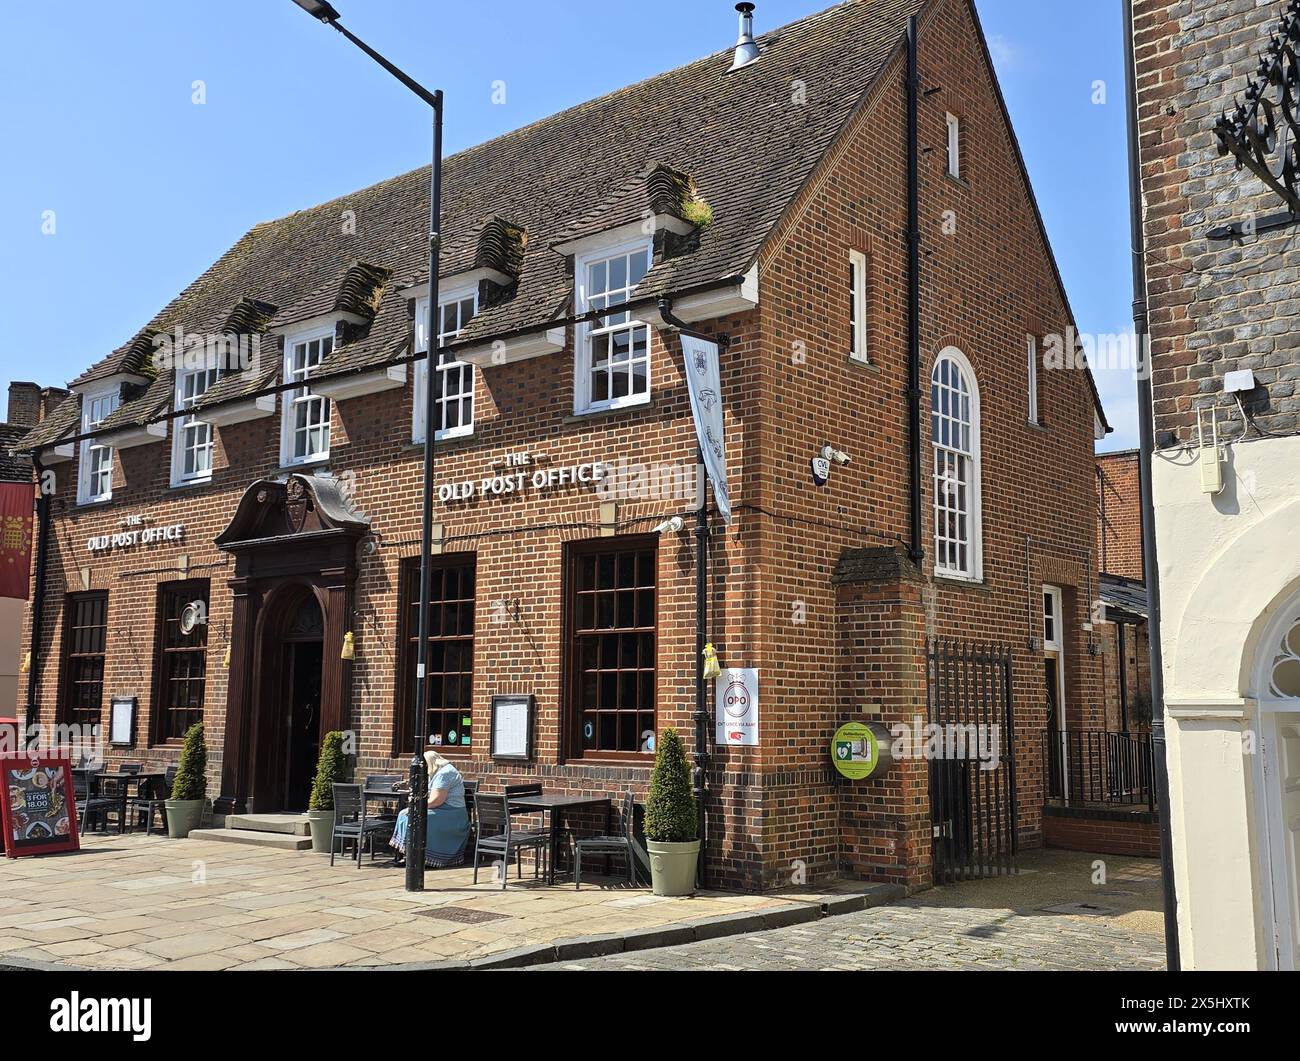 The Old Post Office restaurant and pub in Walingford, UK Stock Photo